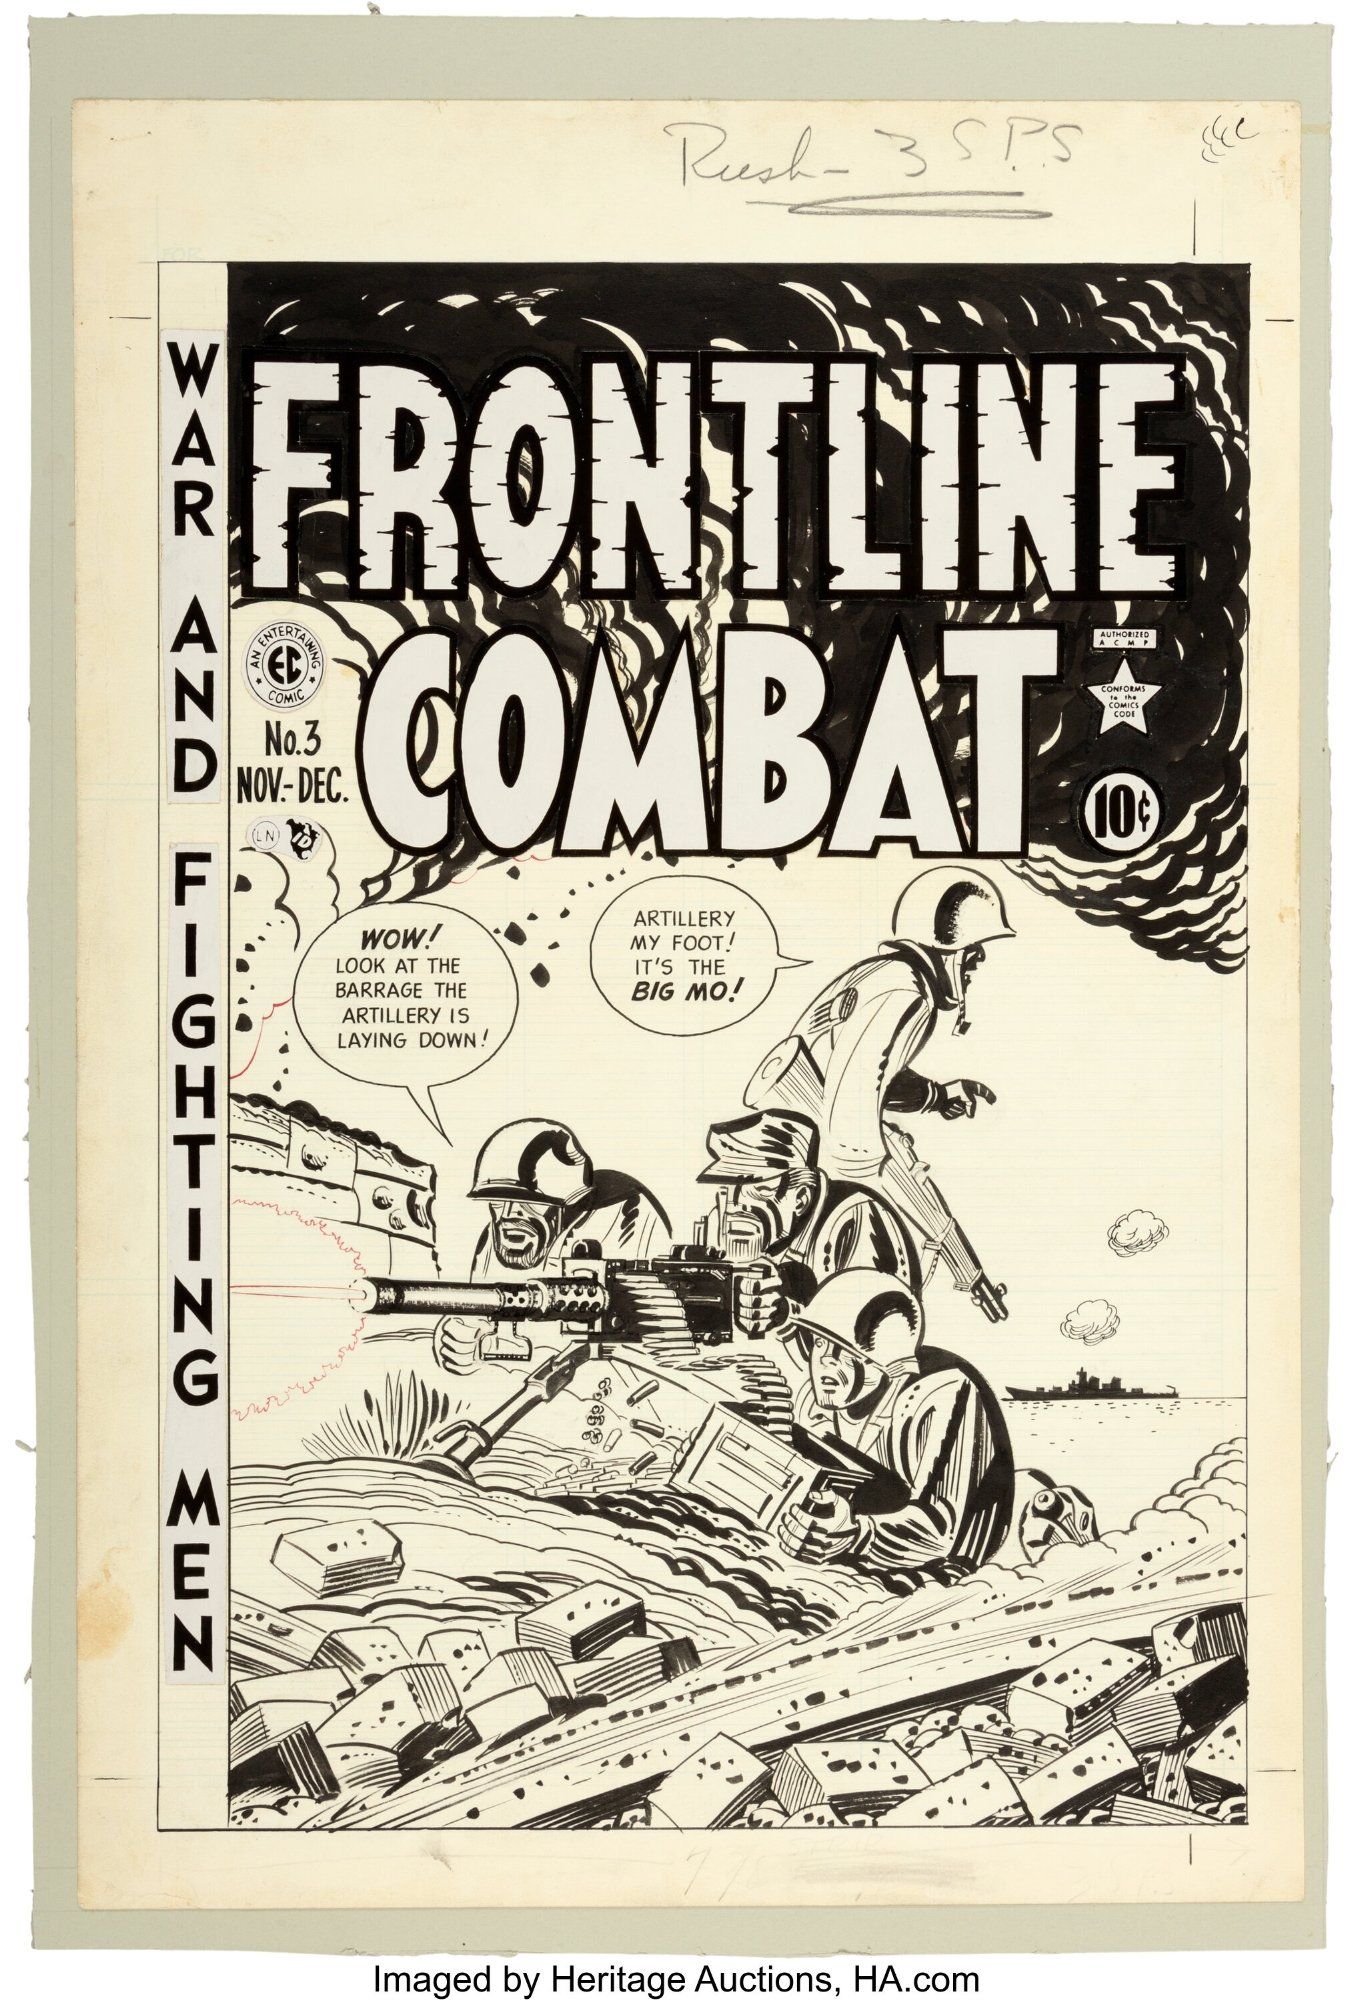 Frontline Combat #3 Cover (EC, 1951), in Heritage Auctions Previews's ...